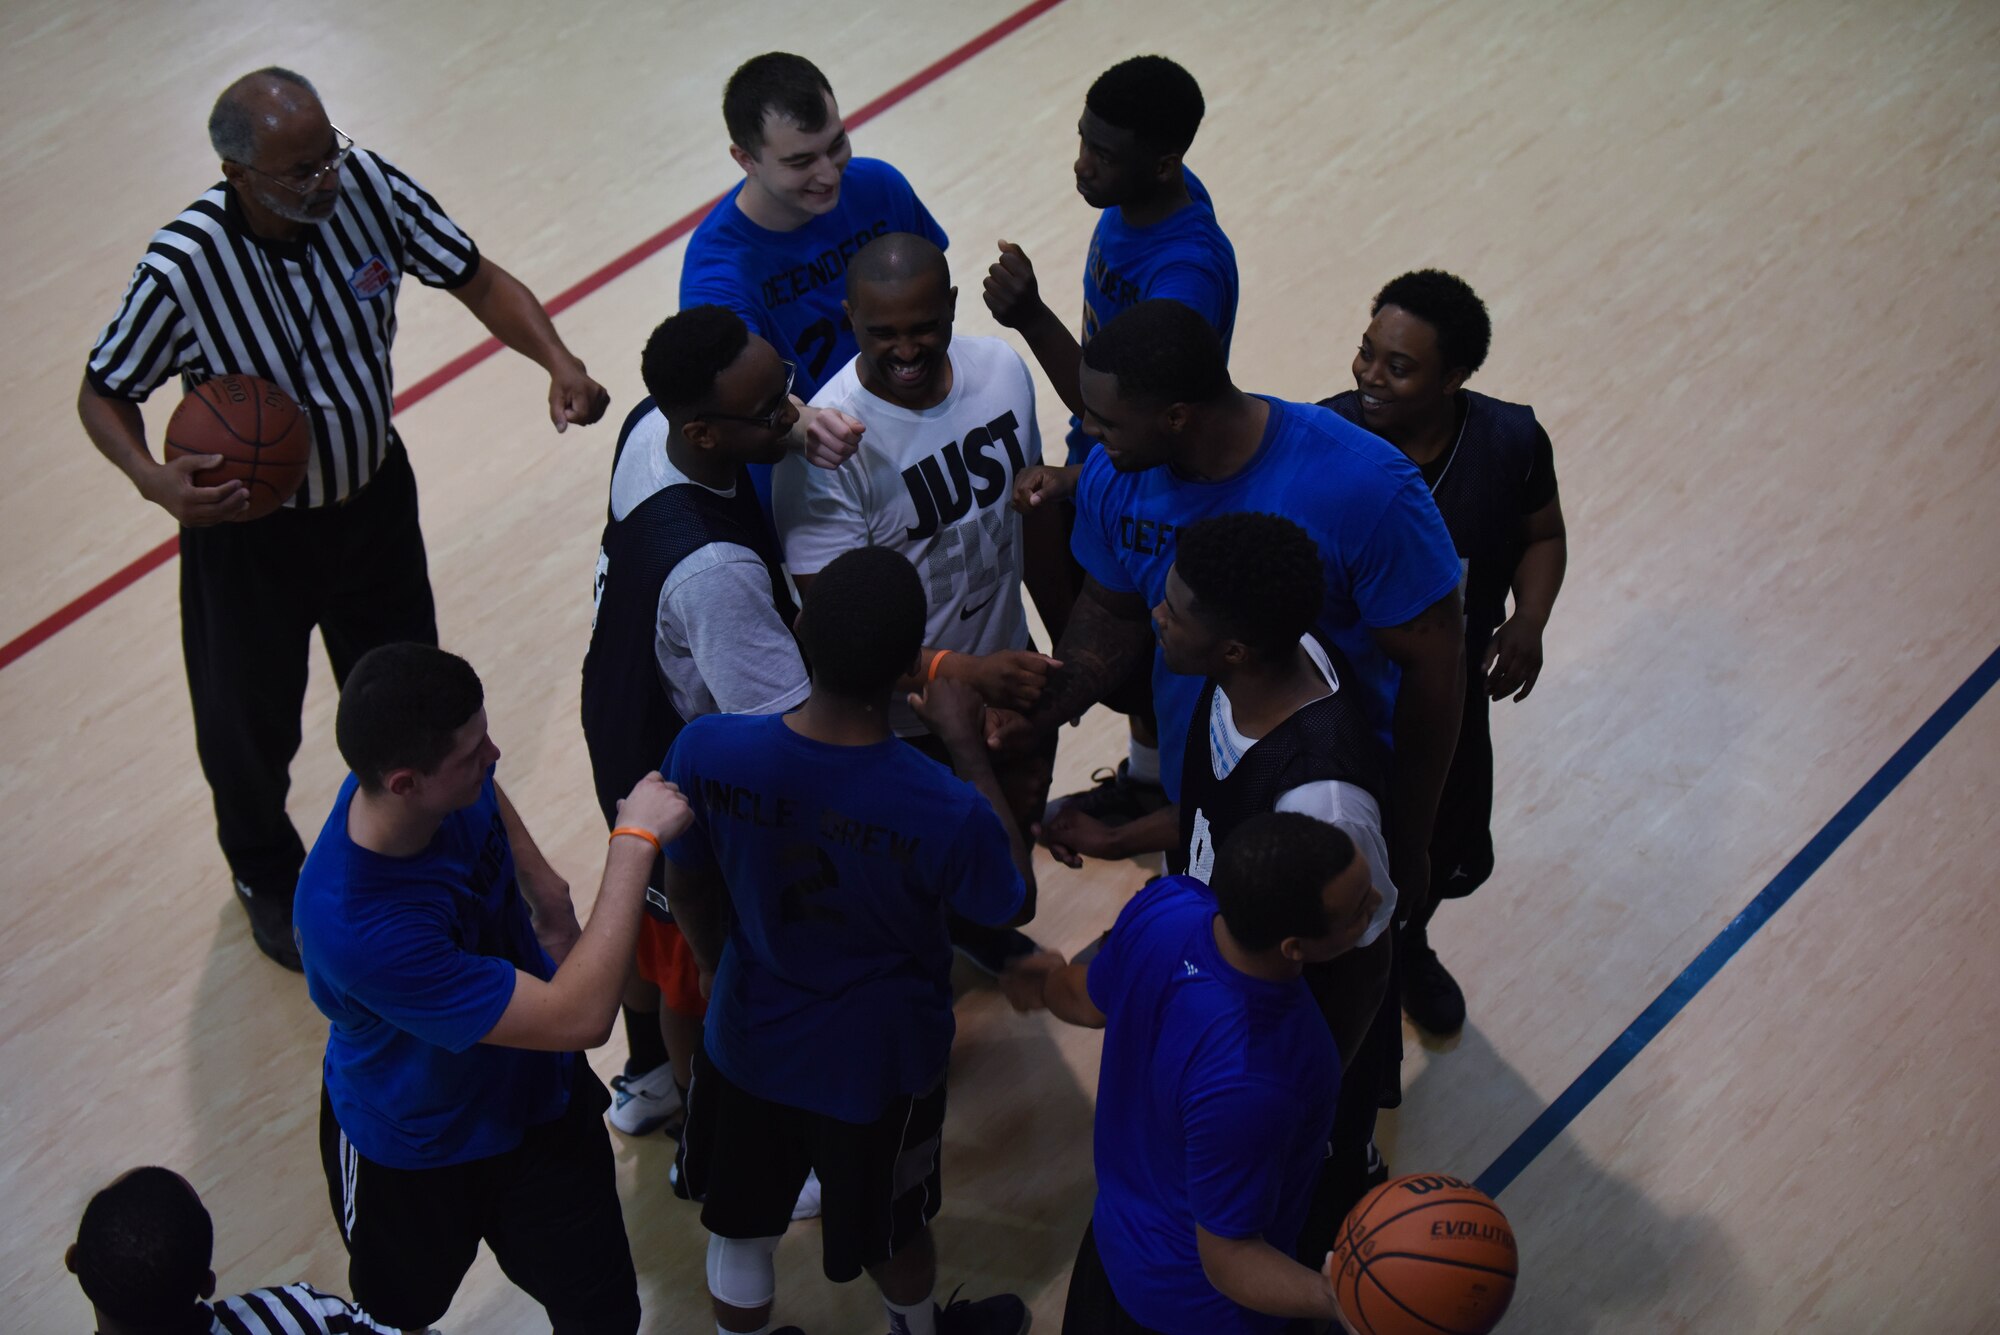 The 2nd Security Forces Squadron basketball team huddles up before the start of the second game in the Intramural Basketball Championship at Barksdale Air Force Base, La., April 18, 2017. The 2nd Force Support Squadron basketball team needed to beat the 2nd SFS team to win the championship. (Air Force photo/Airman 1st Class Stuart Bright)